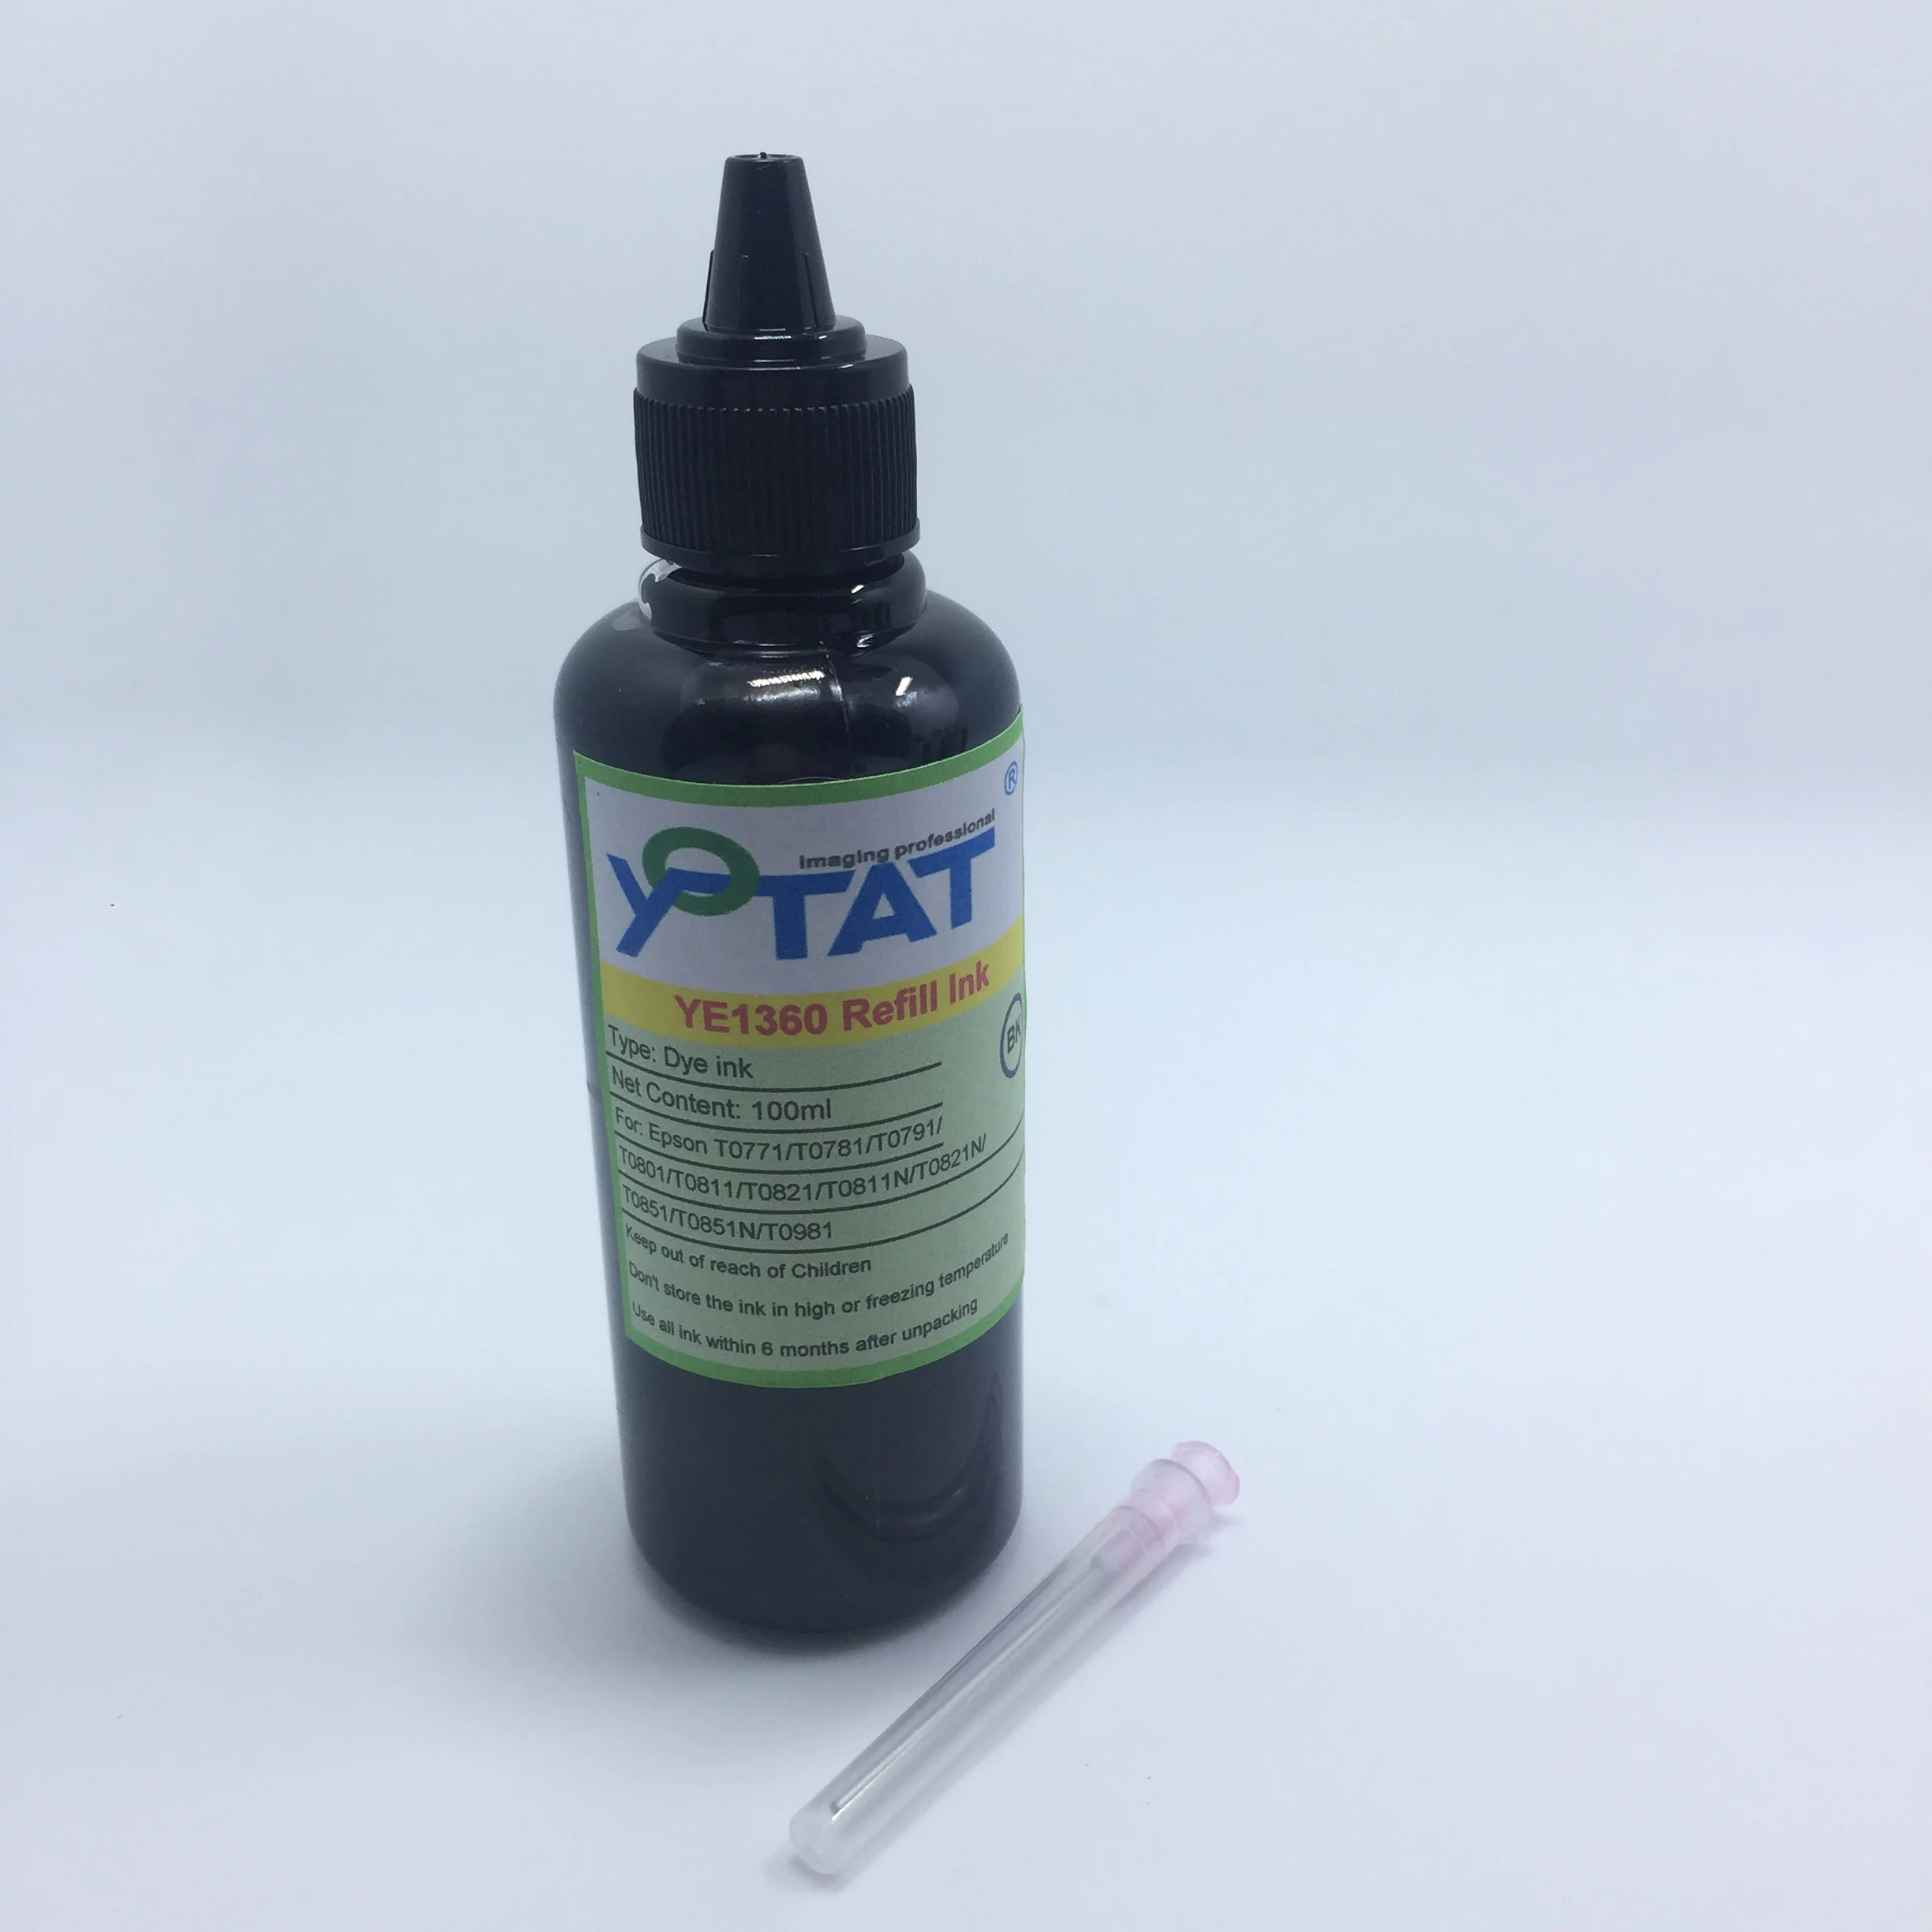 

YOTAT 100ml Refill Dye Ink Compatible for Epson T0771 T0781 T0791 T0801 T0811 T0821 T0811N T0821N T0851 T0851N T0981